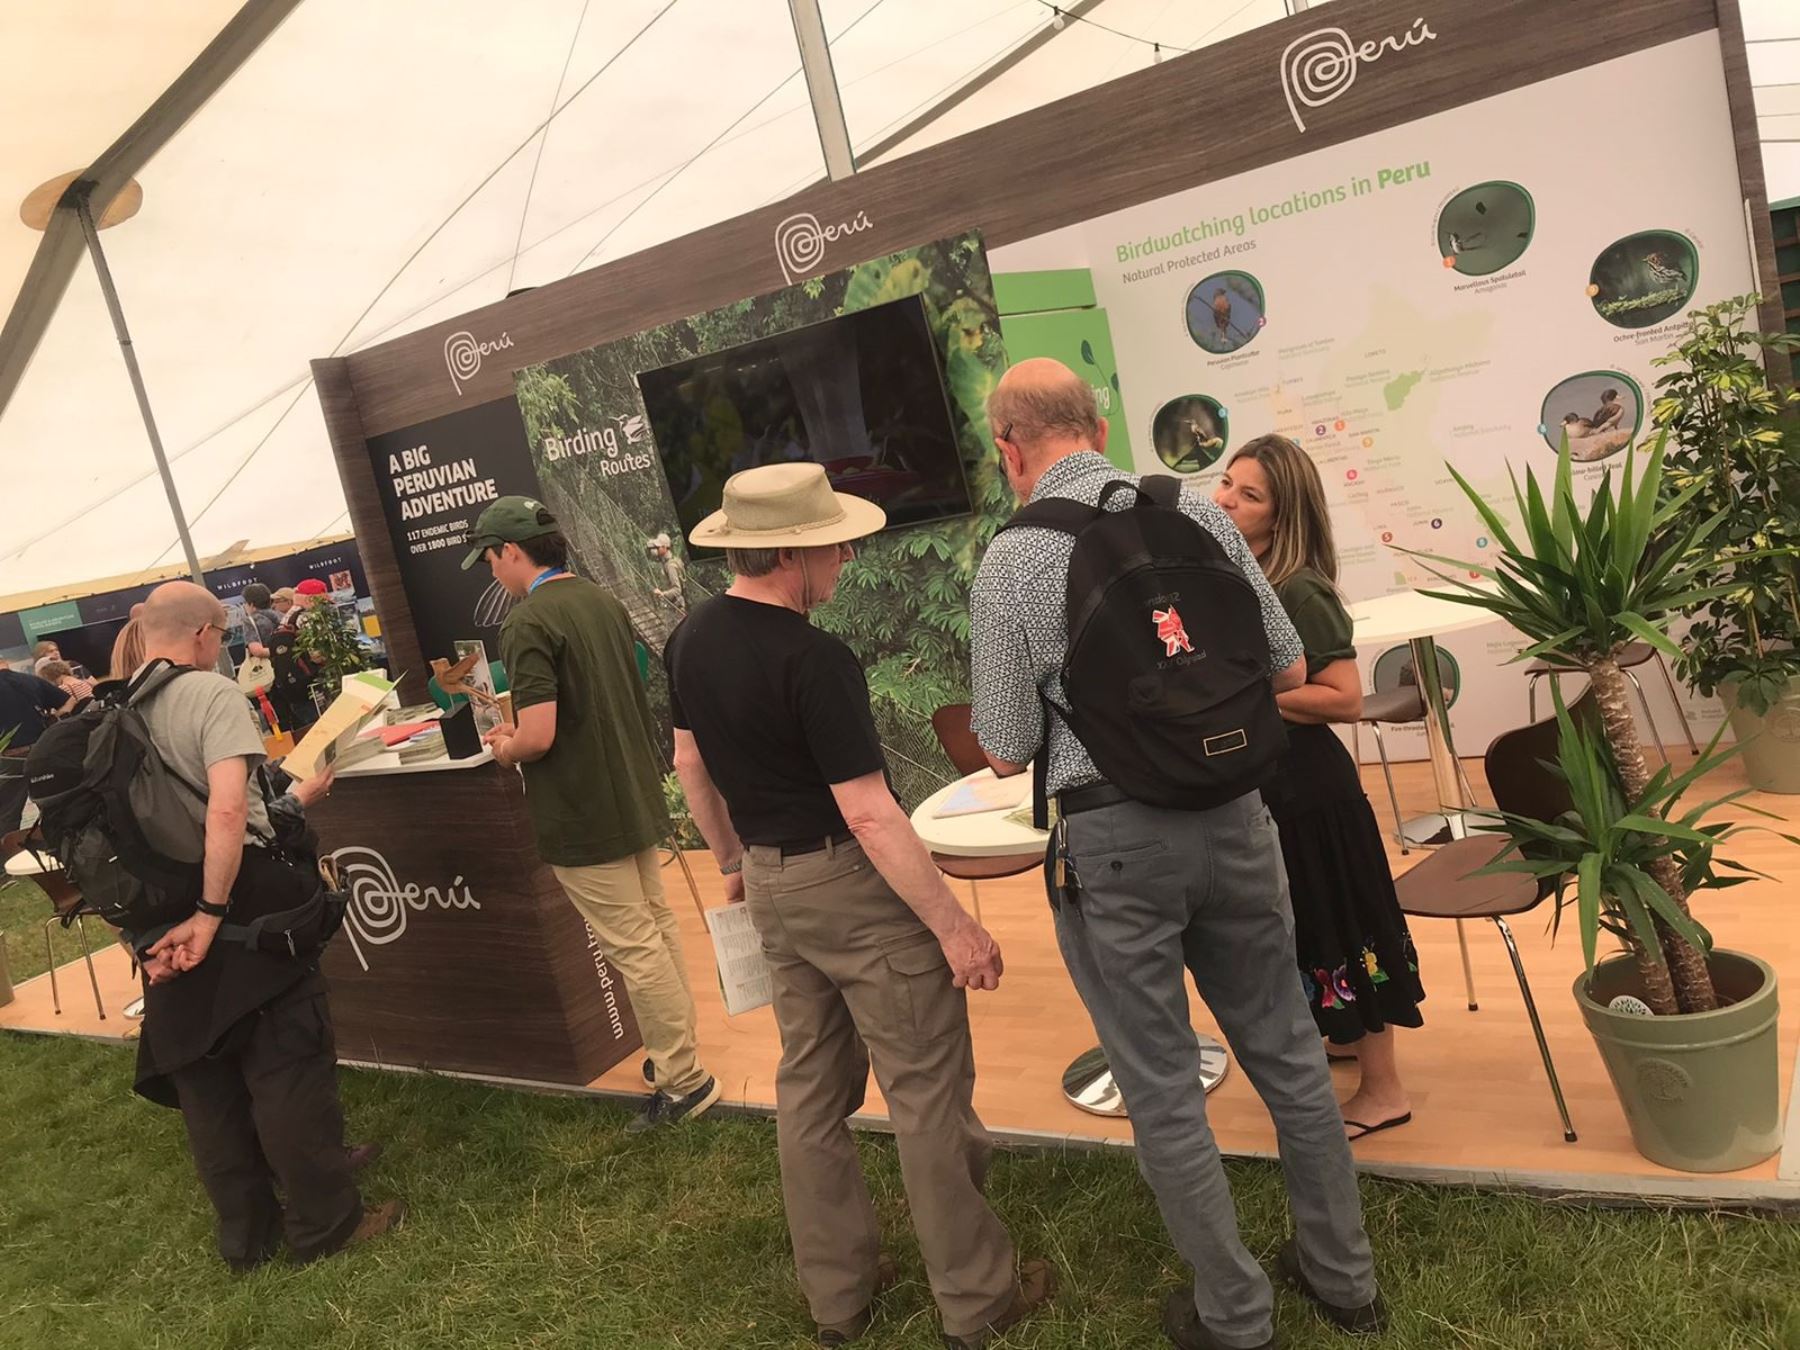 The event took place from July 15 to 17 in Rutland (United Kingdom), bringing together more than 10,000 visitors and 240 exhibitors.